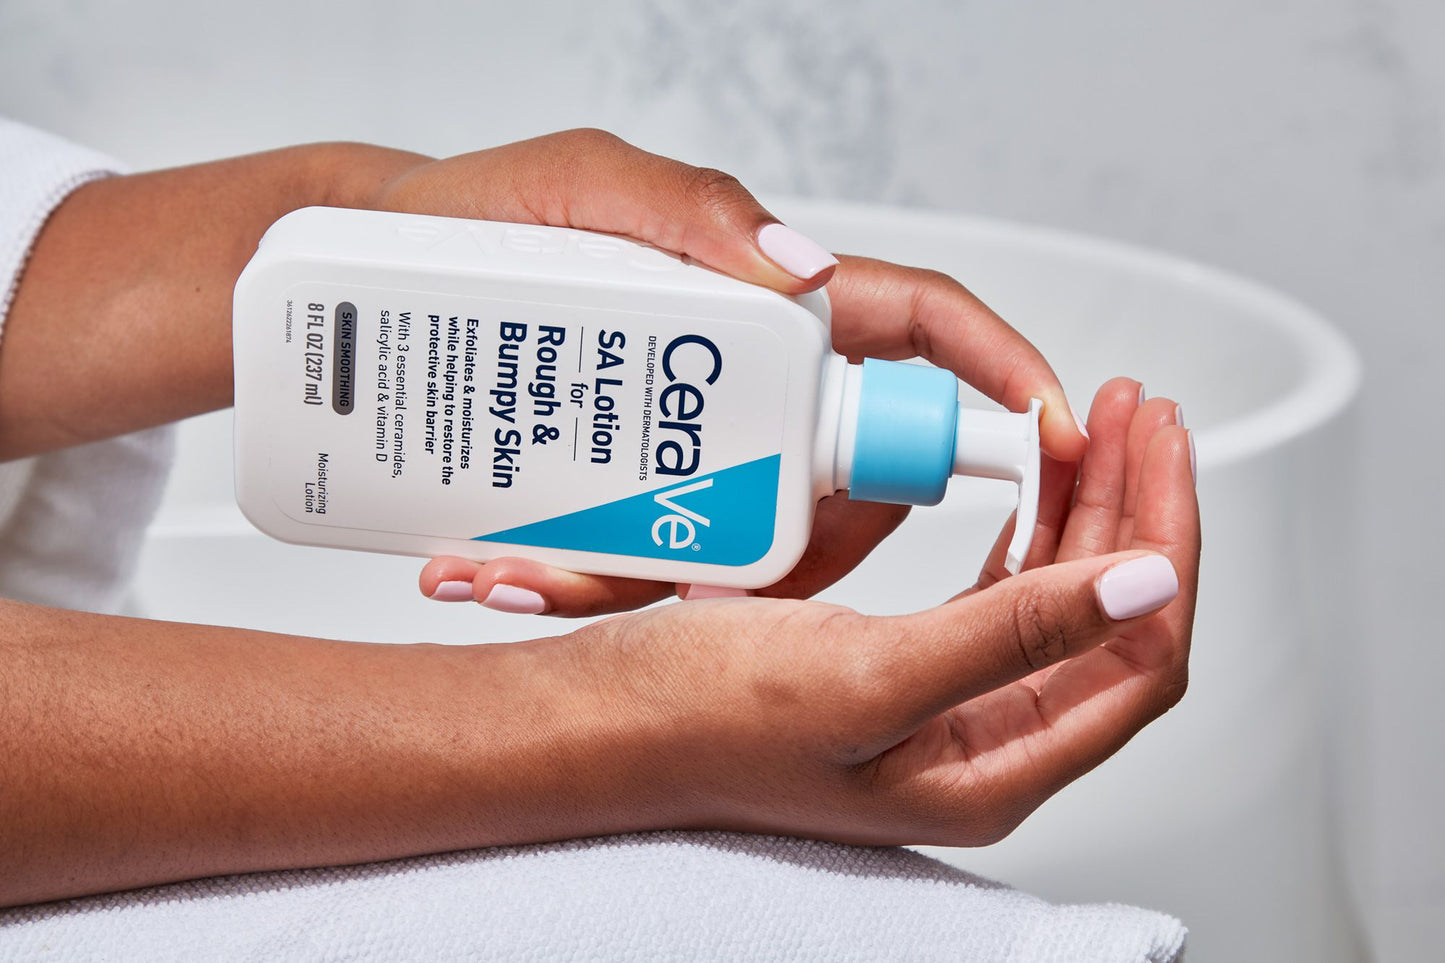 SA Lotion for rough & bumpy skin CeraVe